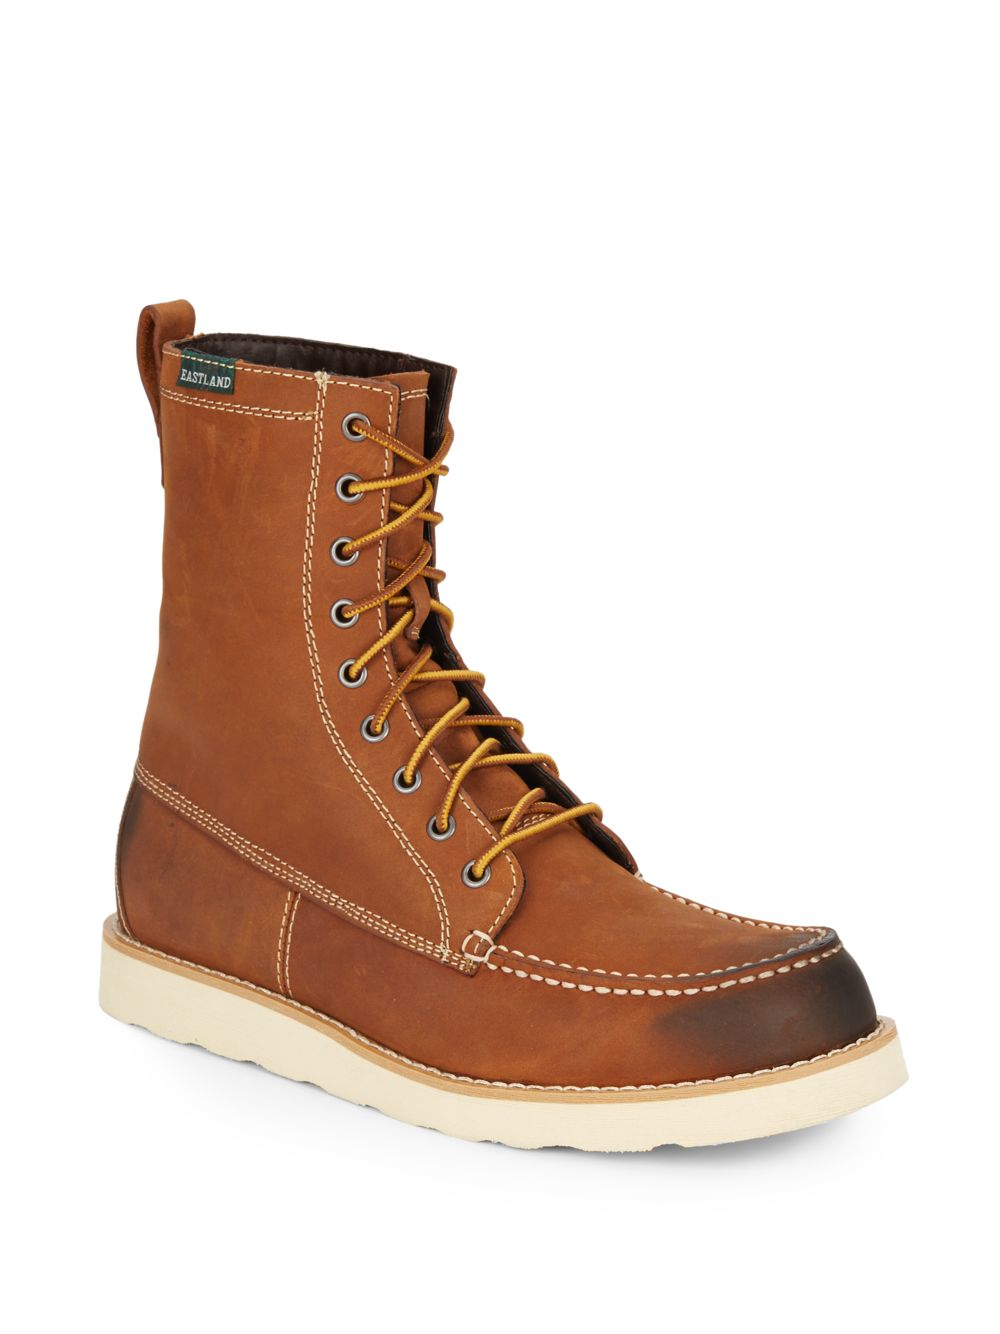 Eastland Danni Leather Moc-toe Boots in Brown for Men - Lyst